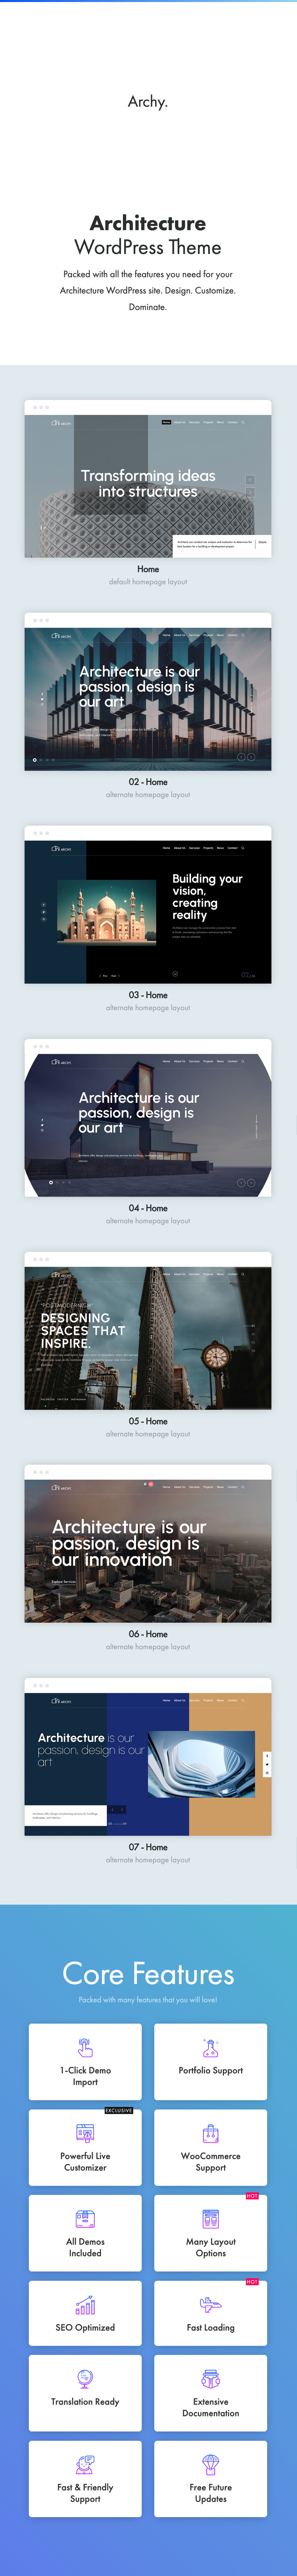 Archy - architecture theme by pixelwars